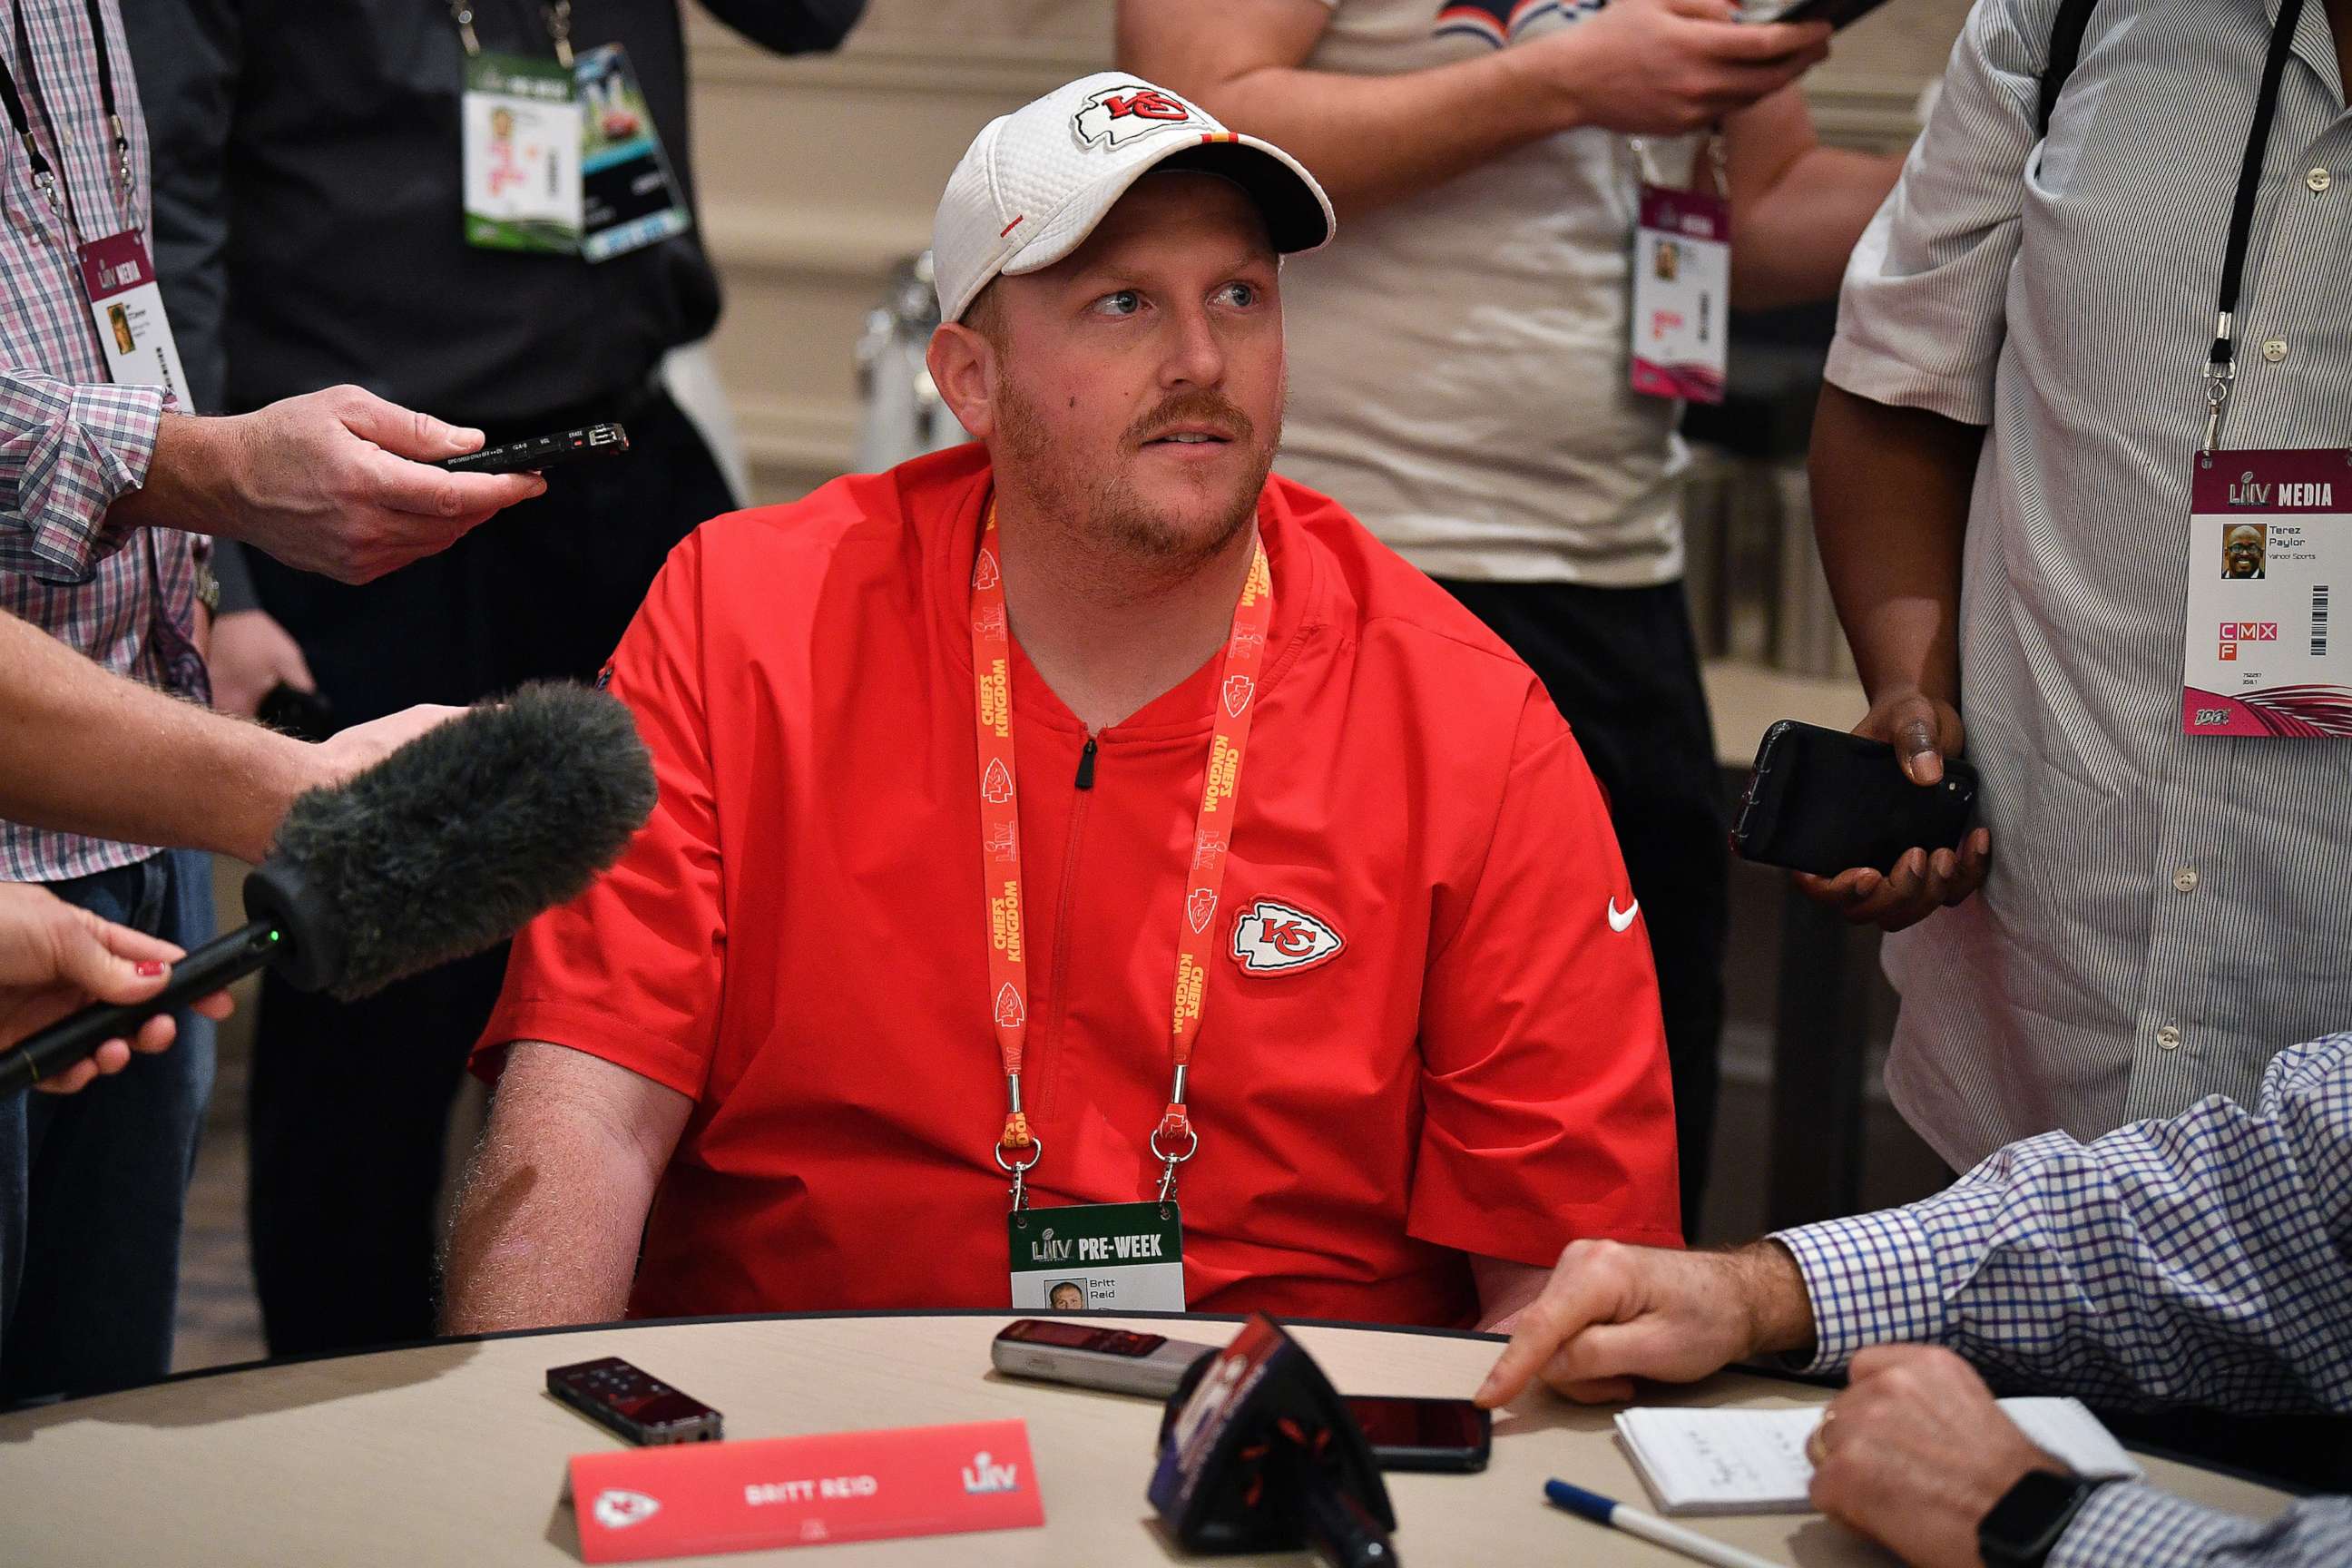 PHOTO: Britt Reid Linebackers coach for the Kansas City Chiefs speaks to the media during the Kansas City Chiefs media availability prior to Super Bowl LIV at the JW Marriott Turnberry on Jan. 29, 2020 in Aventura, Fla.